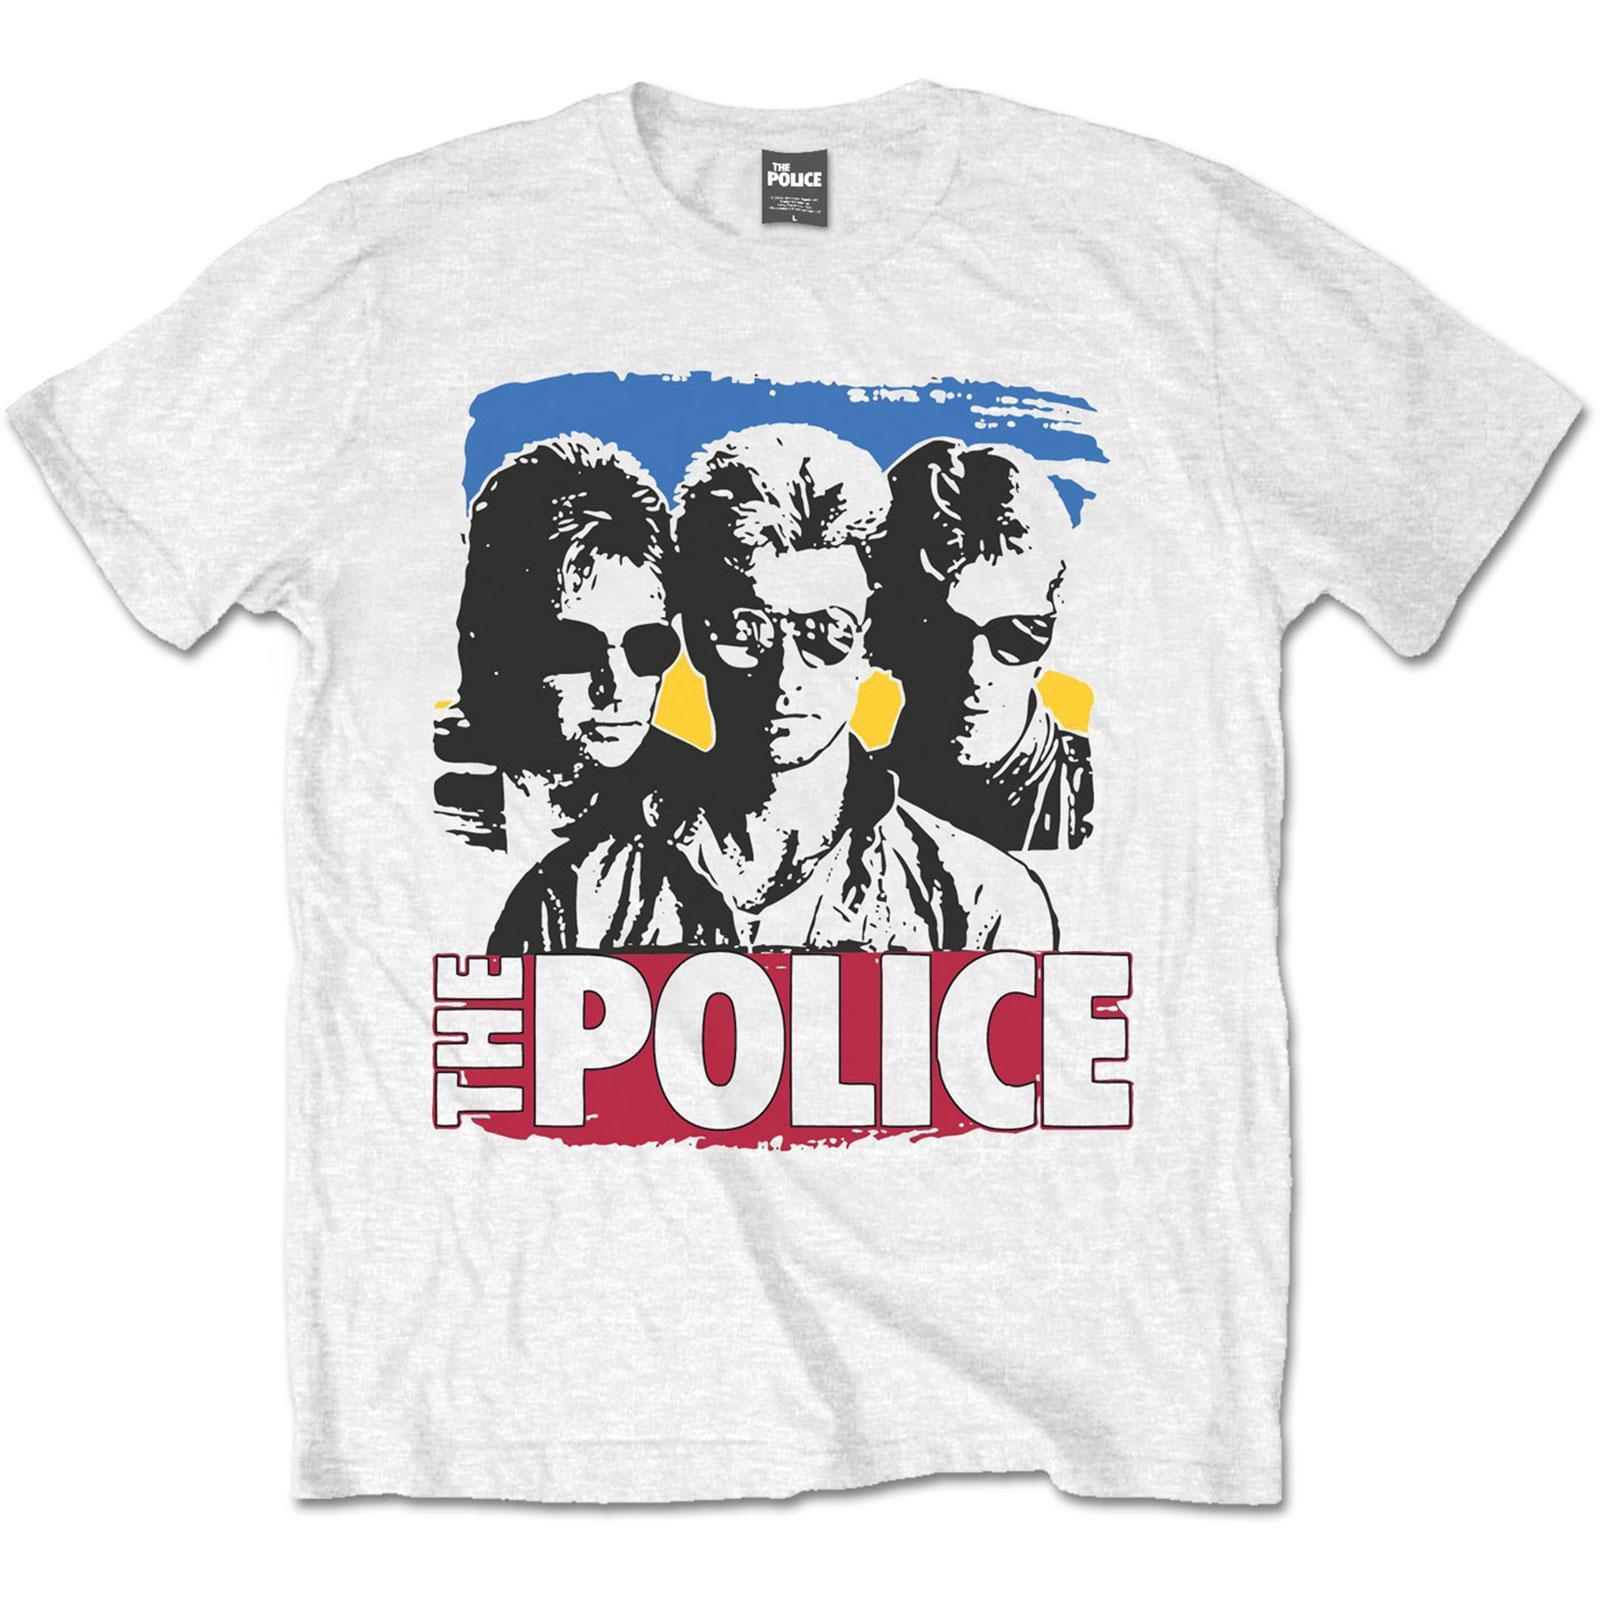 The Police Unisex Adult Band Cotton T-Shirt (White) (L)